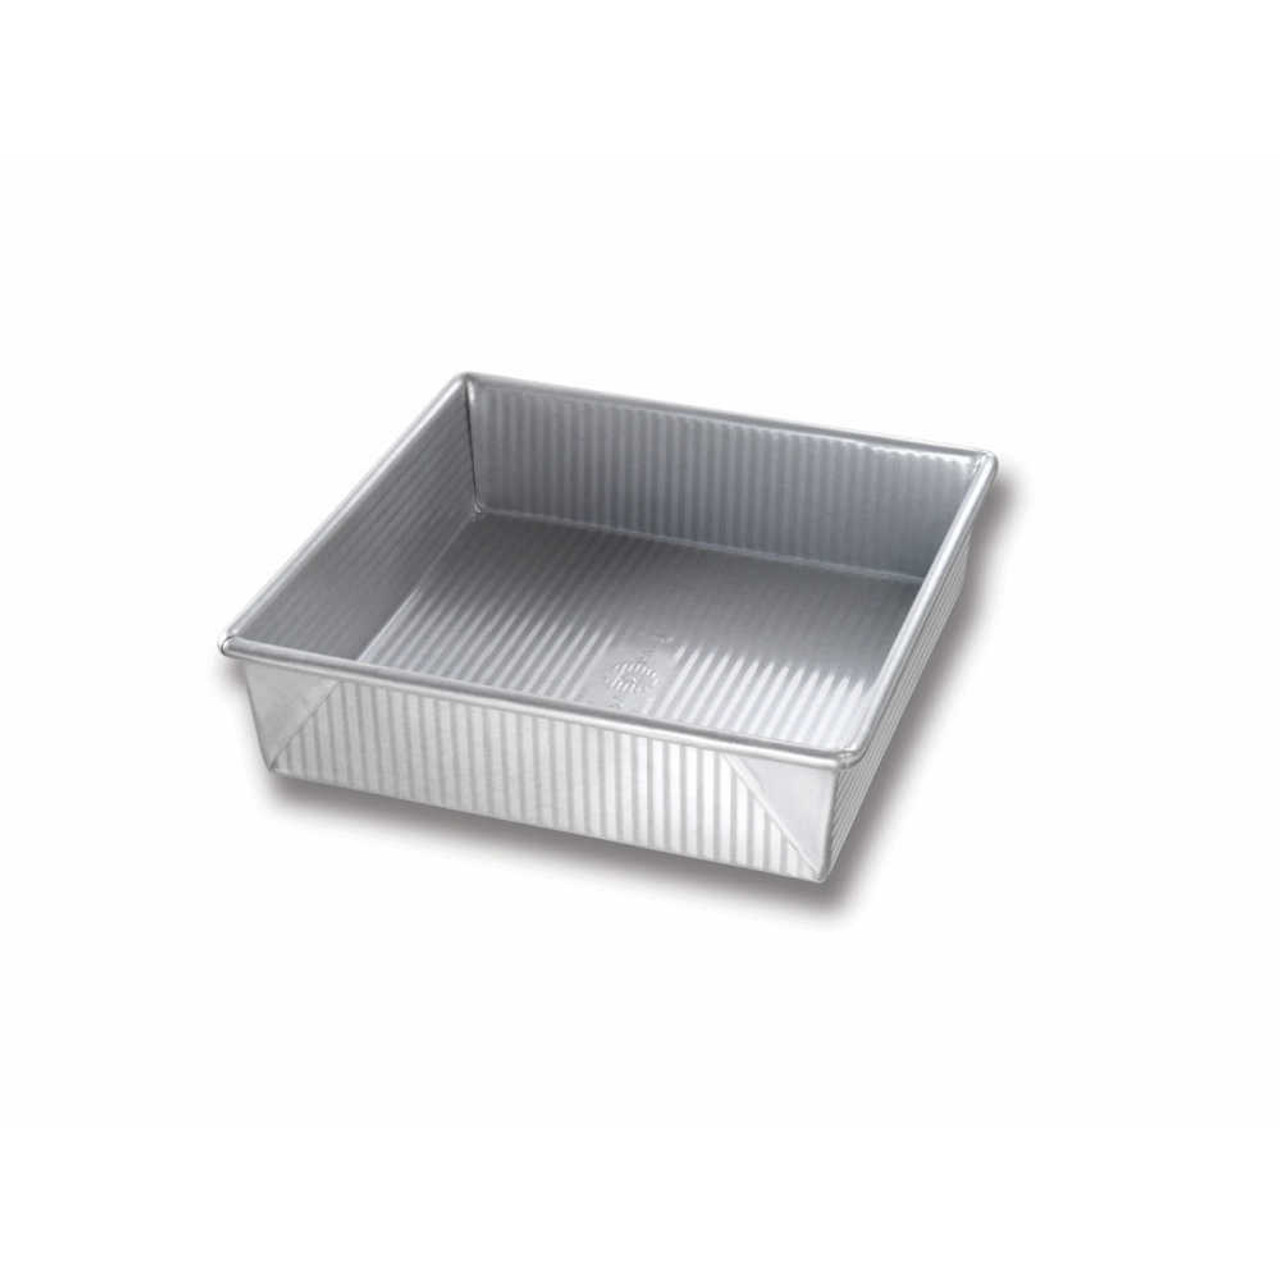 https://cdn11.bigcommerce.com/s-hccytny0od/images/stencil/1280x1280/products/4738/19307/USA_Pan_Five_Piece_Bakeware_Set_1__02247.1652457124.jpg?c=2?imbypass=on